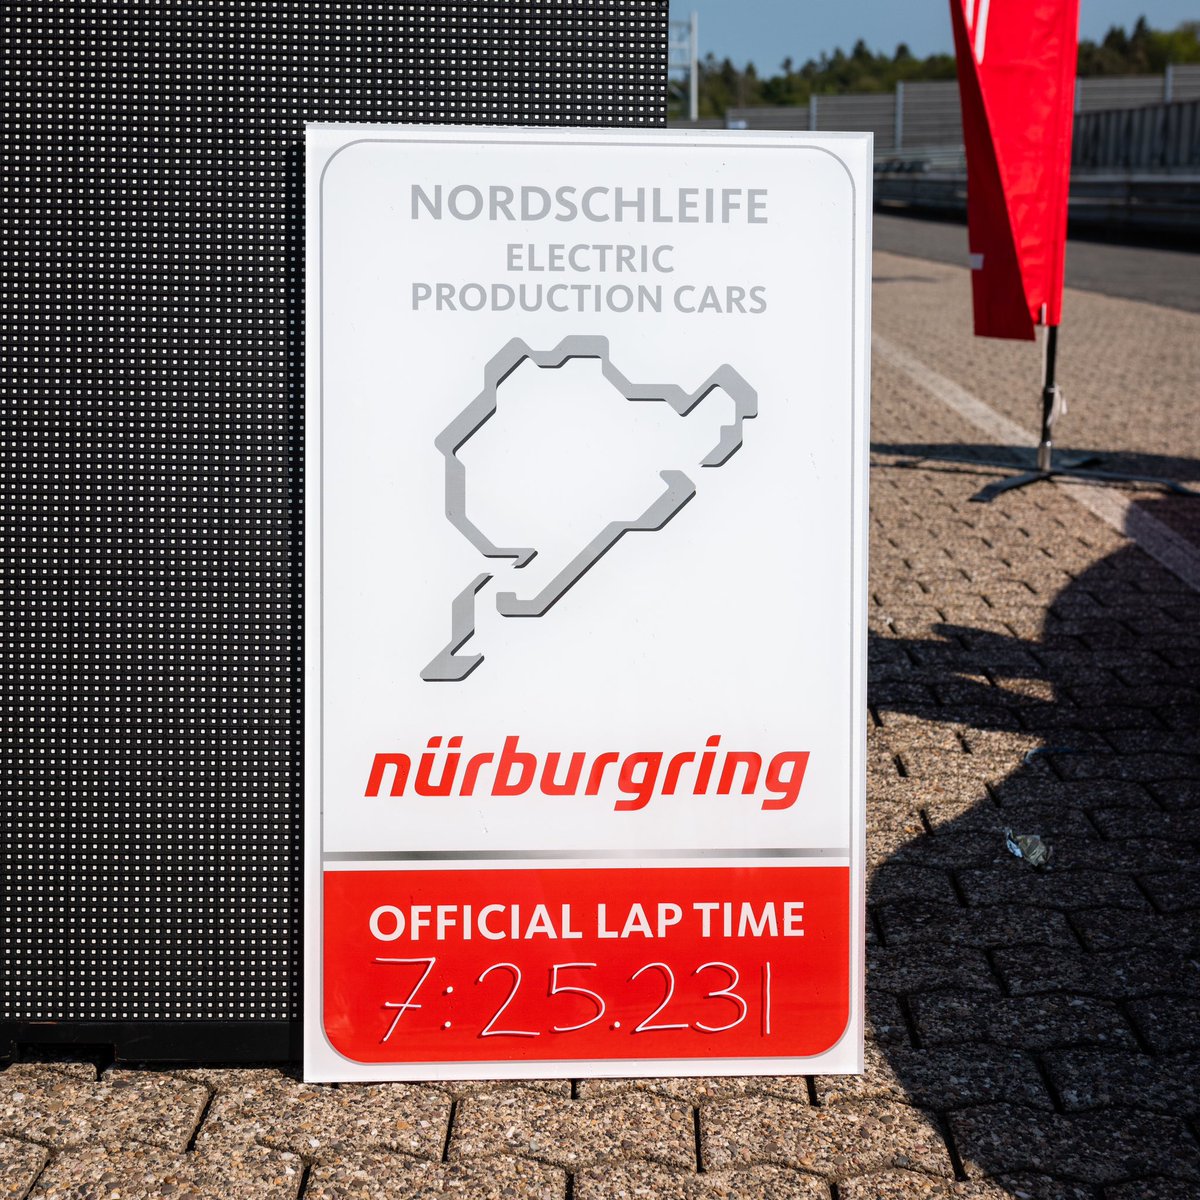 Model S Plaid with track pack just set new lap record for a production EV at Nürburgring 💪